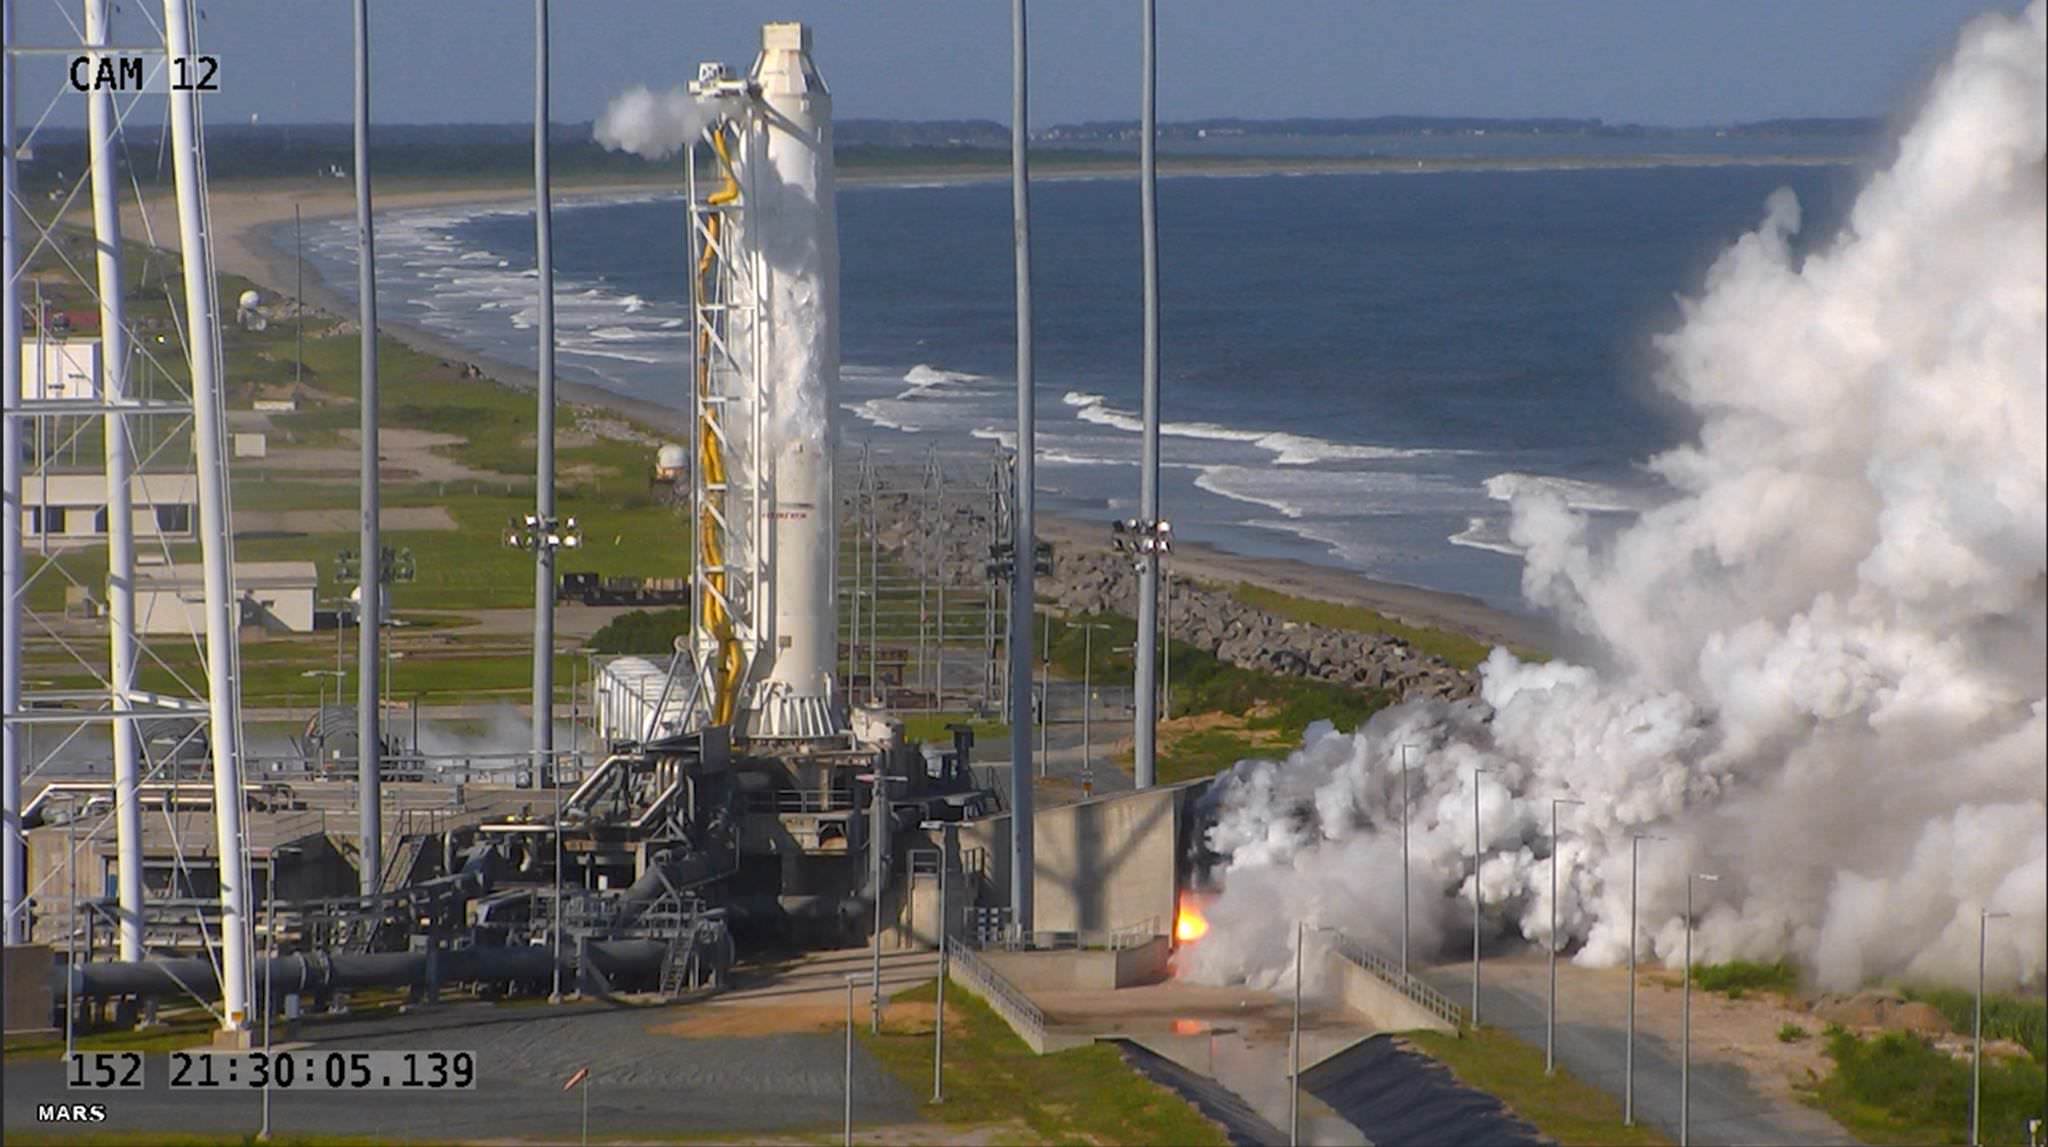 Orbital ATK conducted a full-power test of the upgraded first stage propulsion system of its Antares rocket on May 31, 2016 at Virginia Space’s Mid-Atlantic Regional Spaceport (MARS) Pad 0A.  Credit: NASA/Orbital ATK